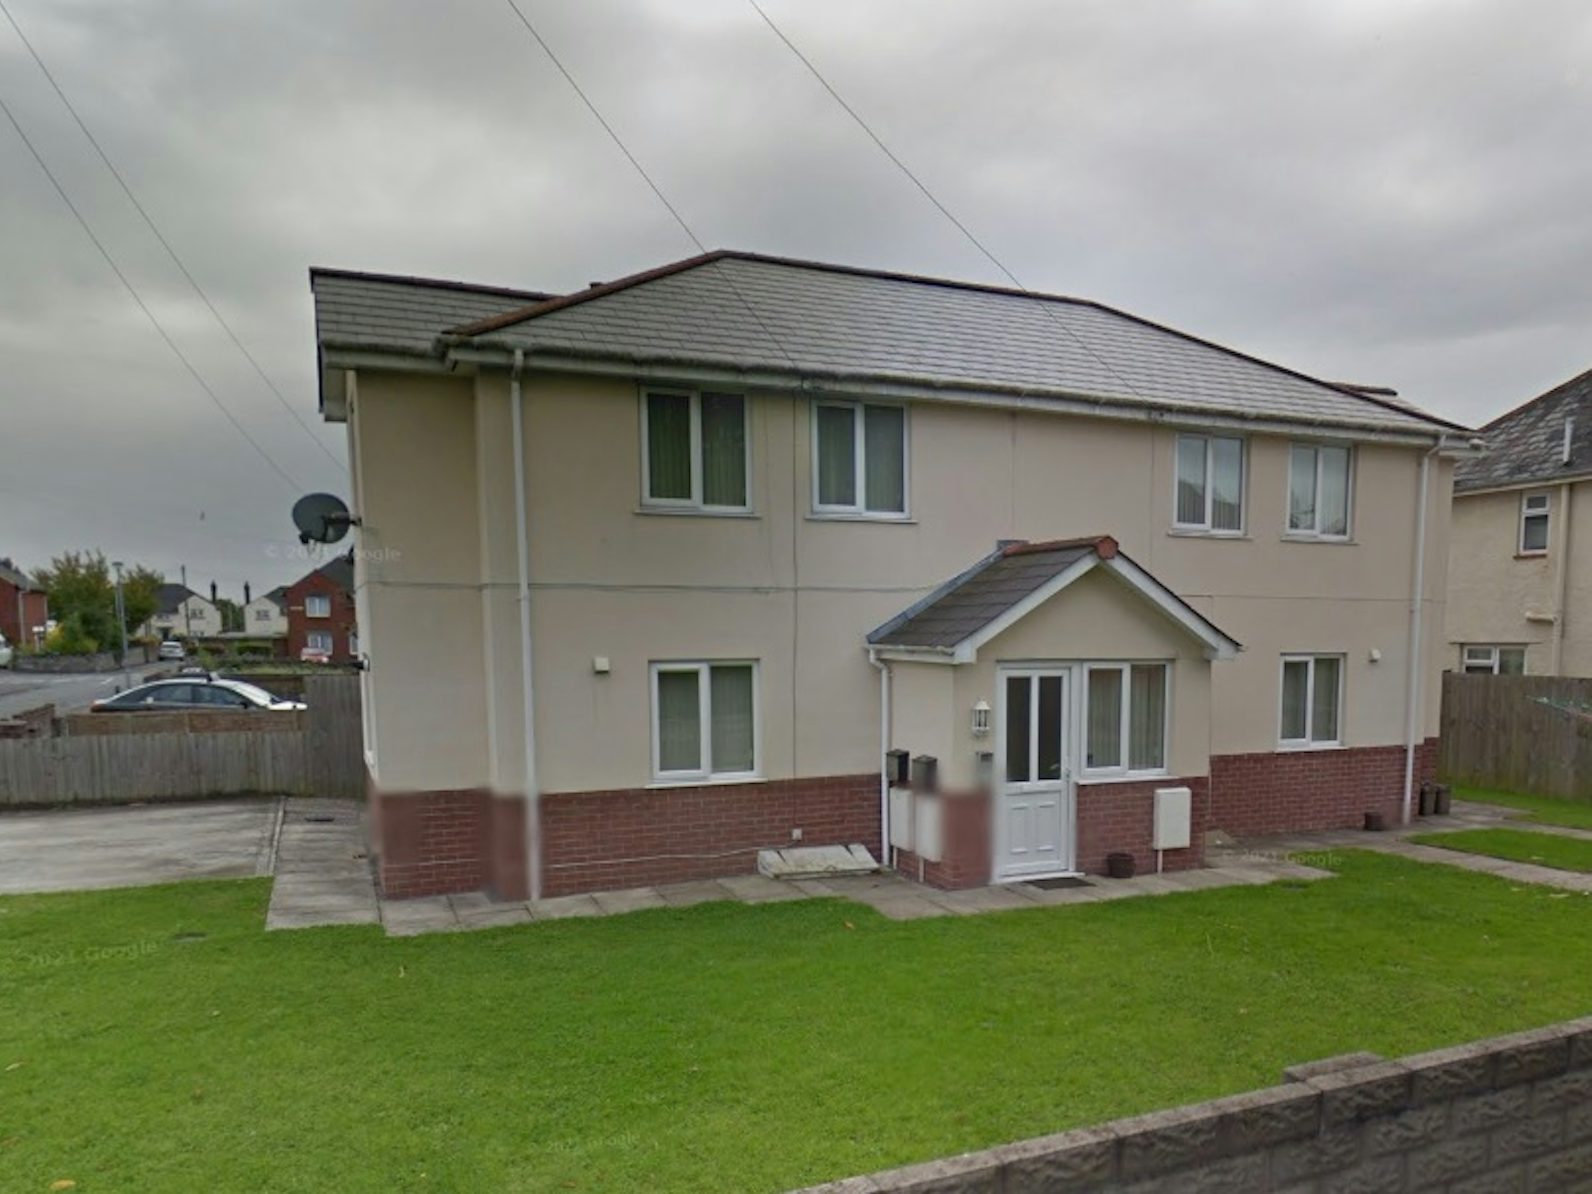 Flat for sale on Appledore Road Cardiff, CF14